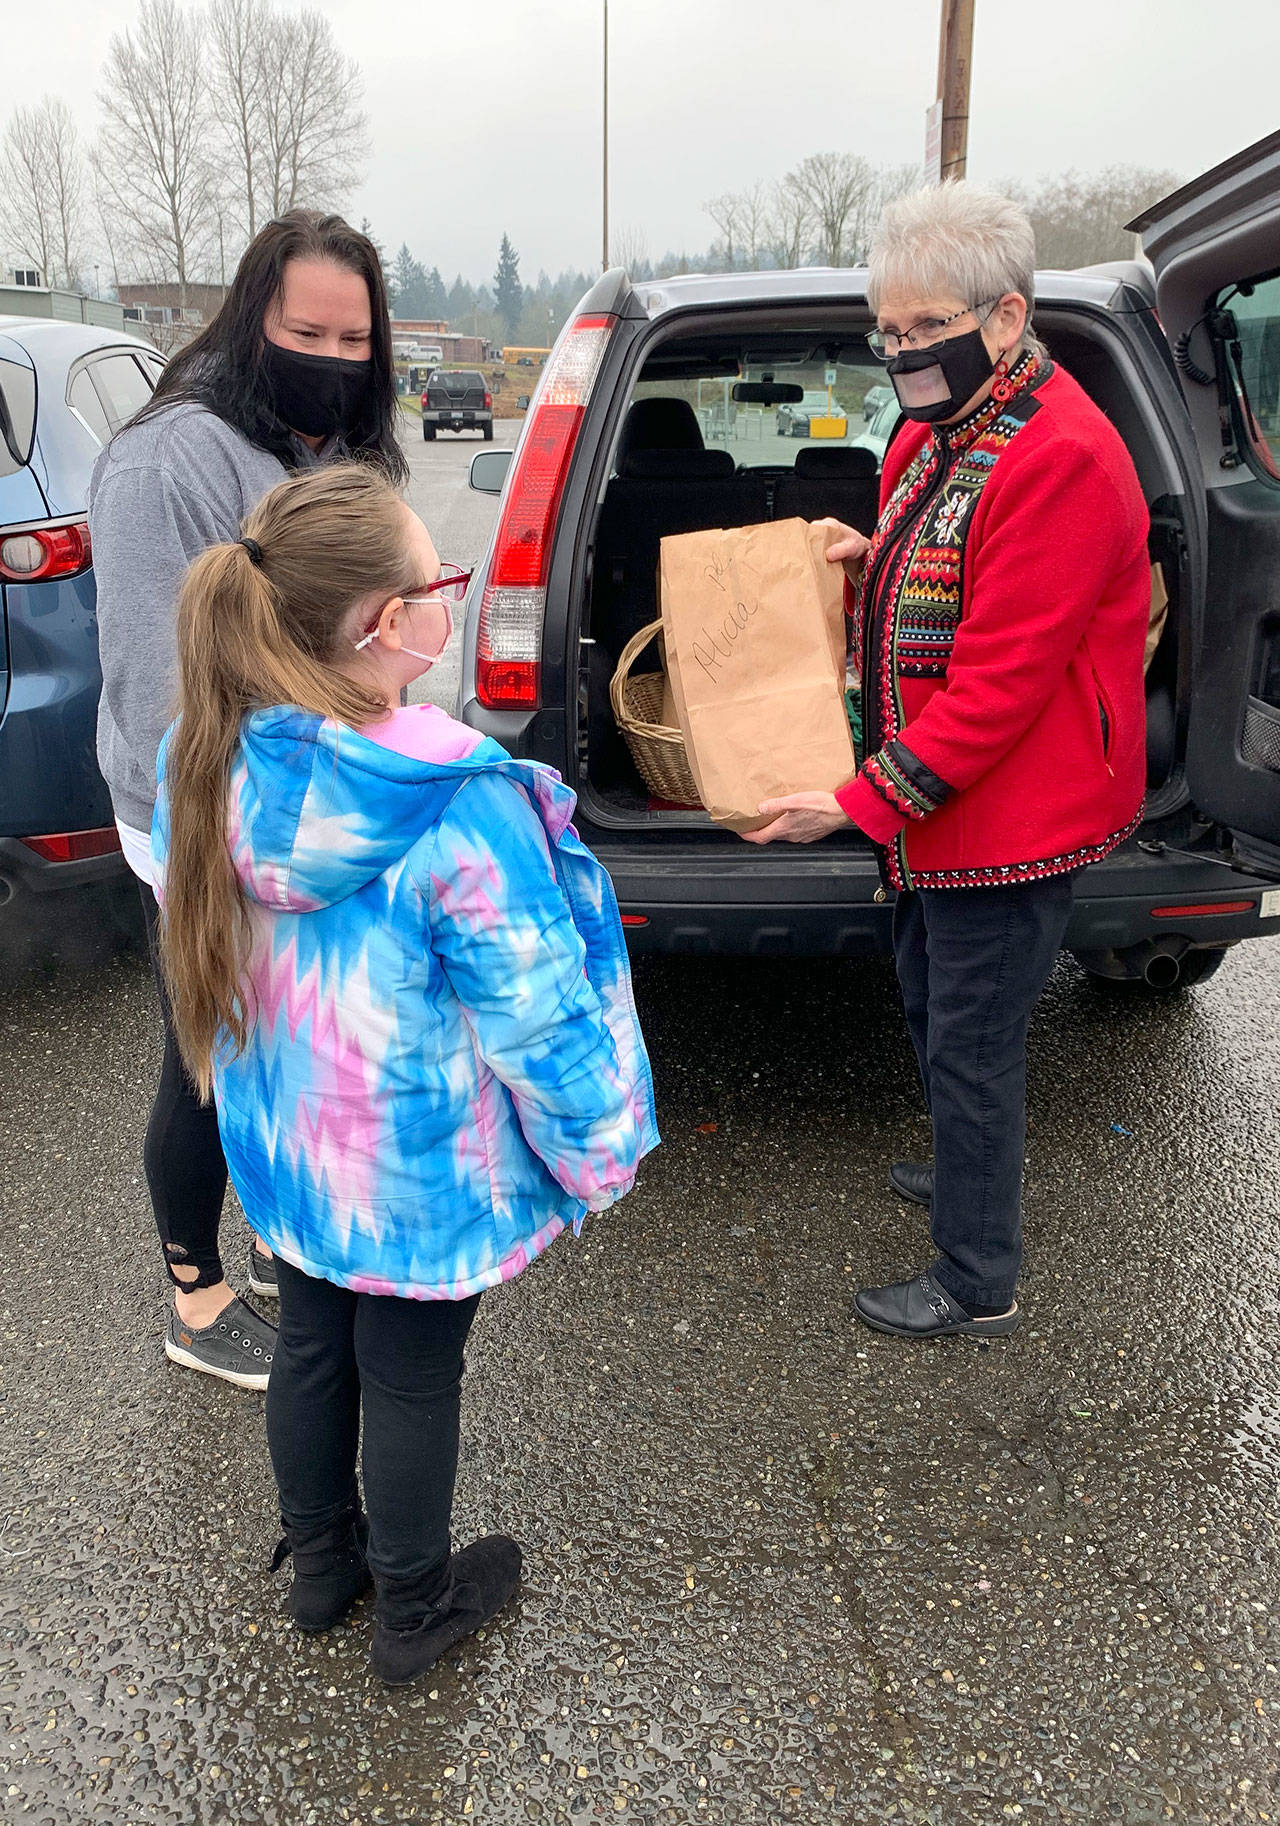 Sandi Fleury’s baking business, called “From the Garden to the Table,” started in 2018 after she decided to leave the dentistry field. Here, she delivers orders to a mom and her daughter in Port Orchard. (Bob Smith | Kitsap Daily News)